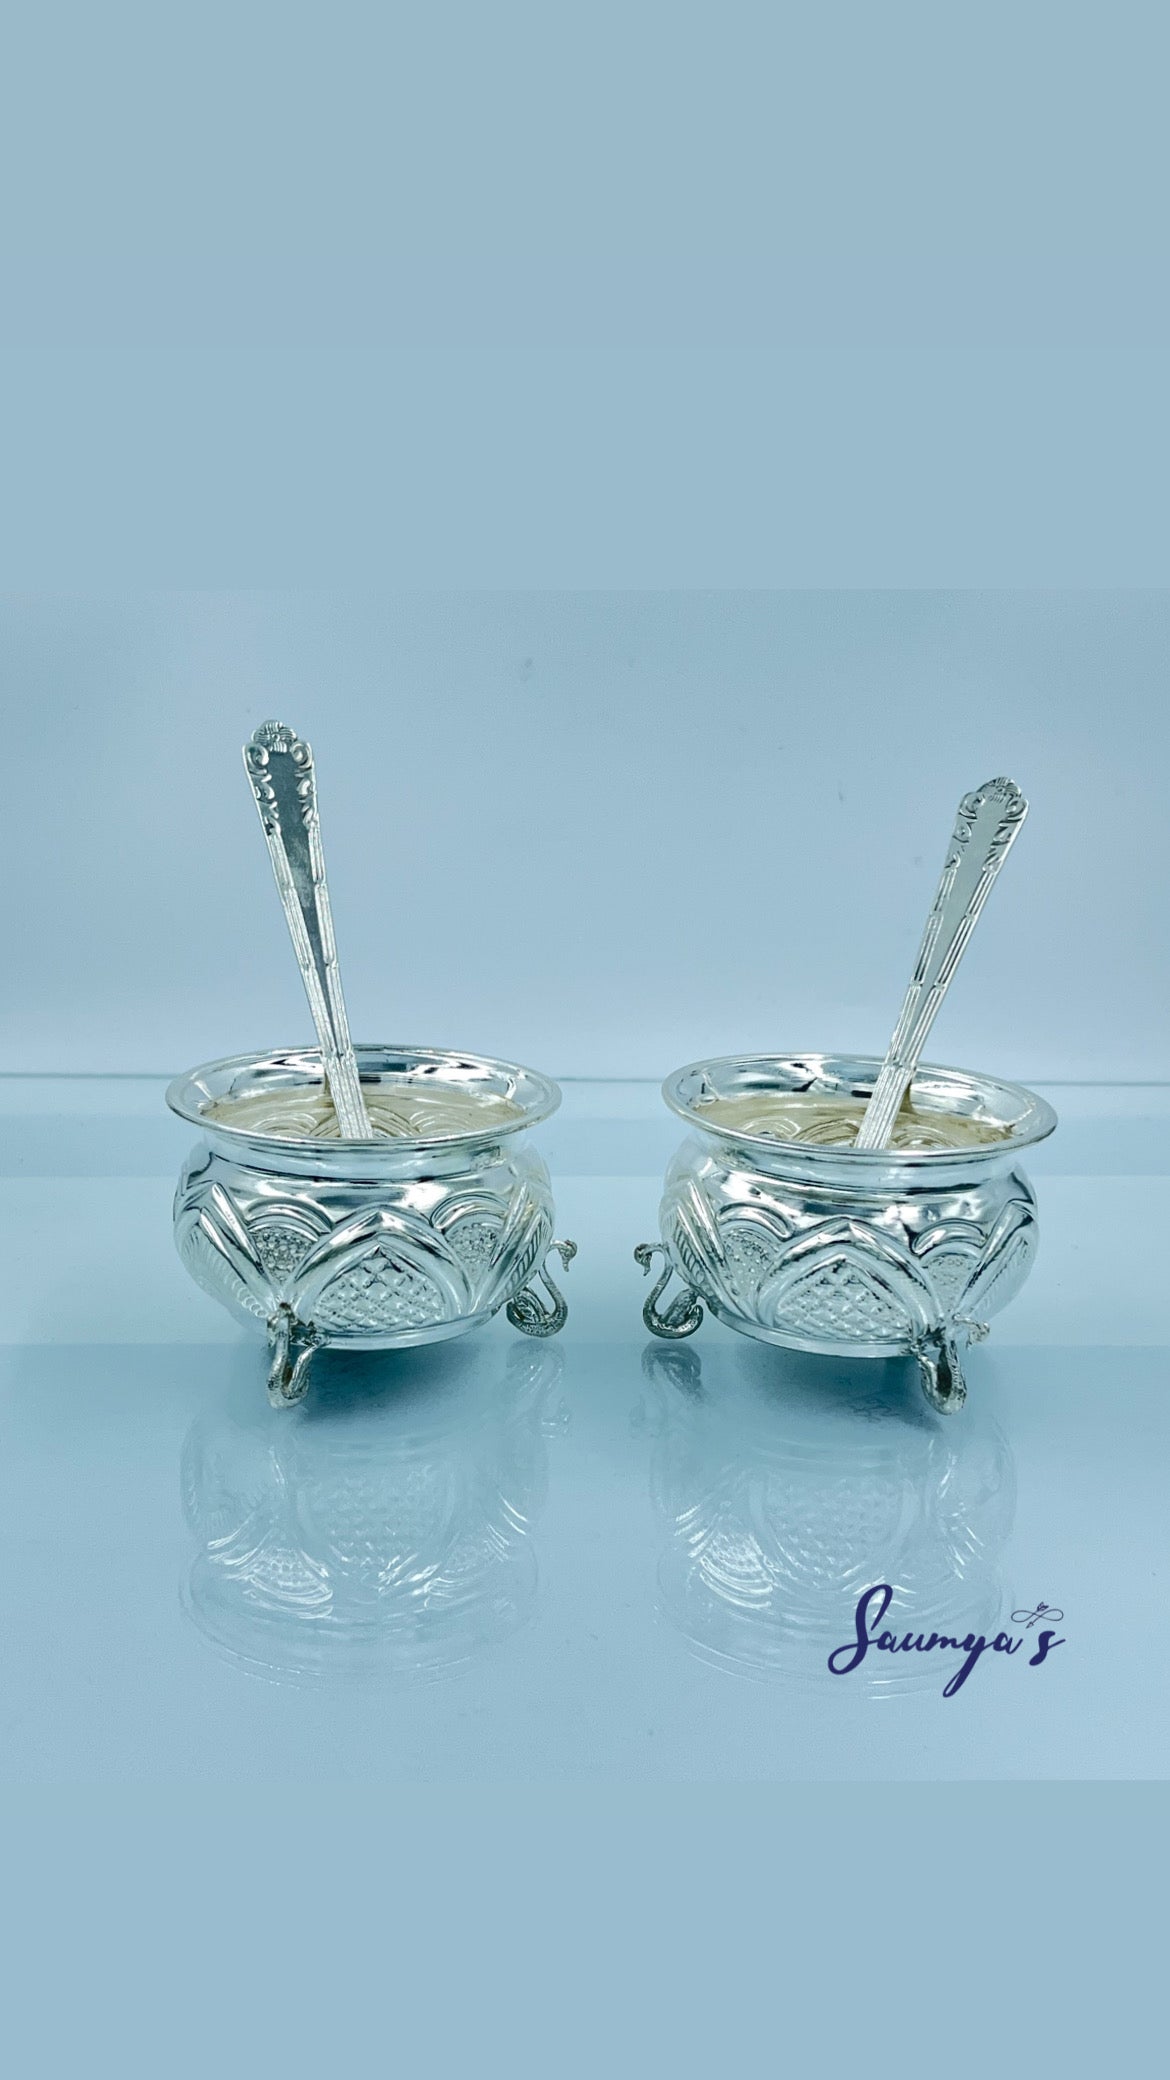 Beautiful Hand Crafted Peacock Design Bowls Set of 2! Crafted in pure silver